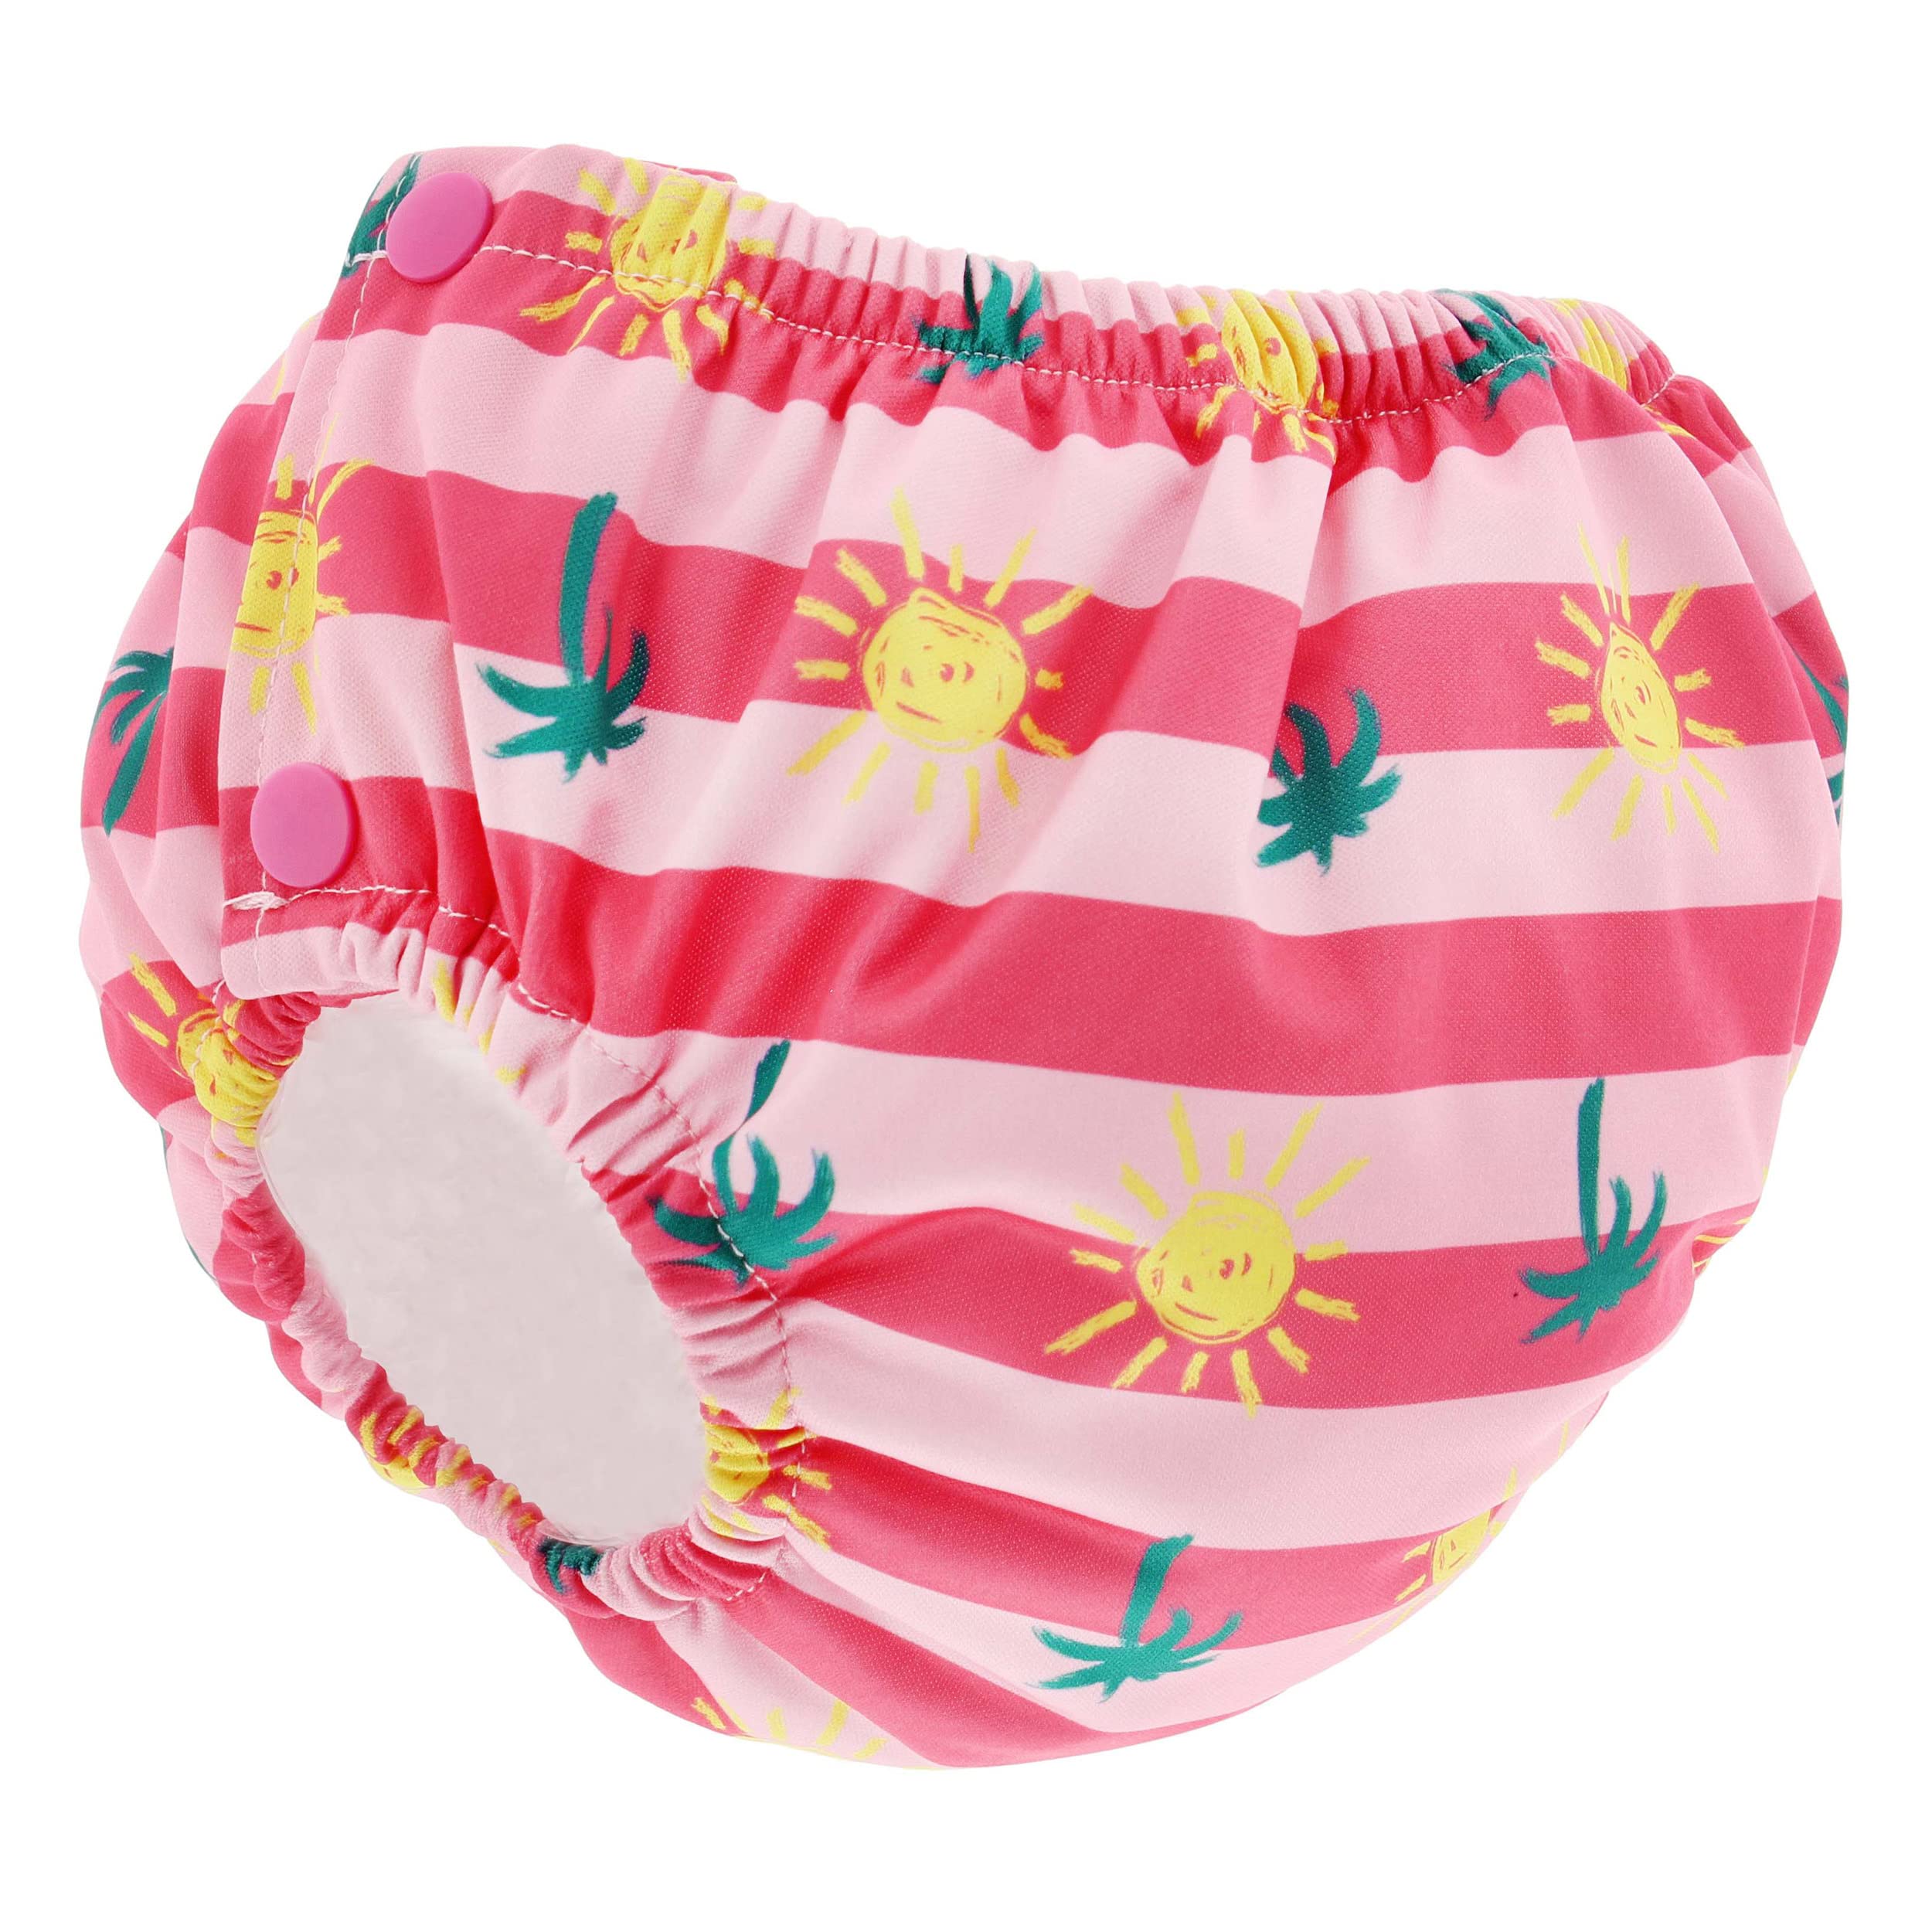 Acorn Baby Toddler Swim Diaper Size 5 and 6 Adjustable - Pink Palm Trees Swimmers Reusable Toddler Swimming Diaper